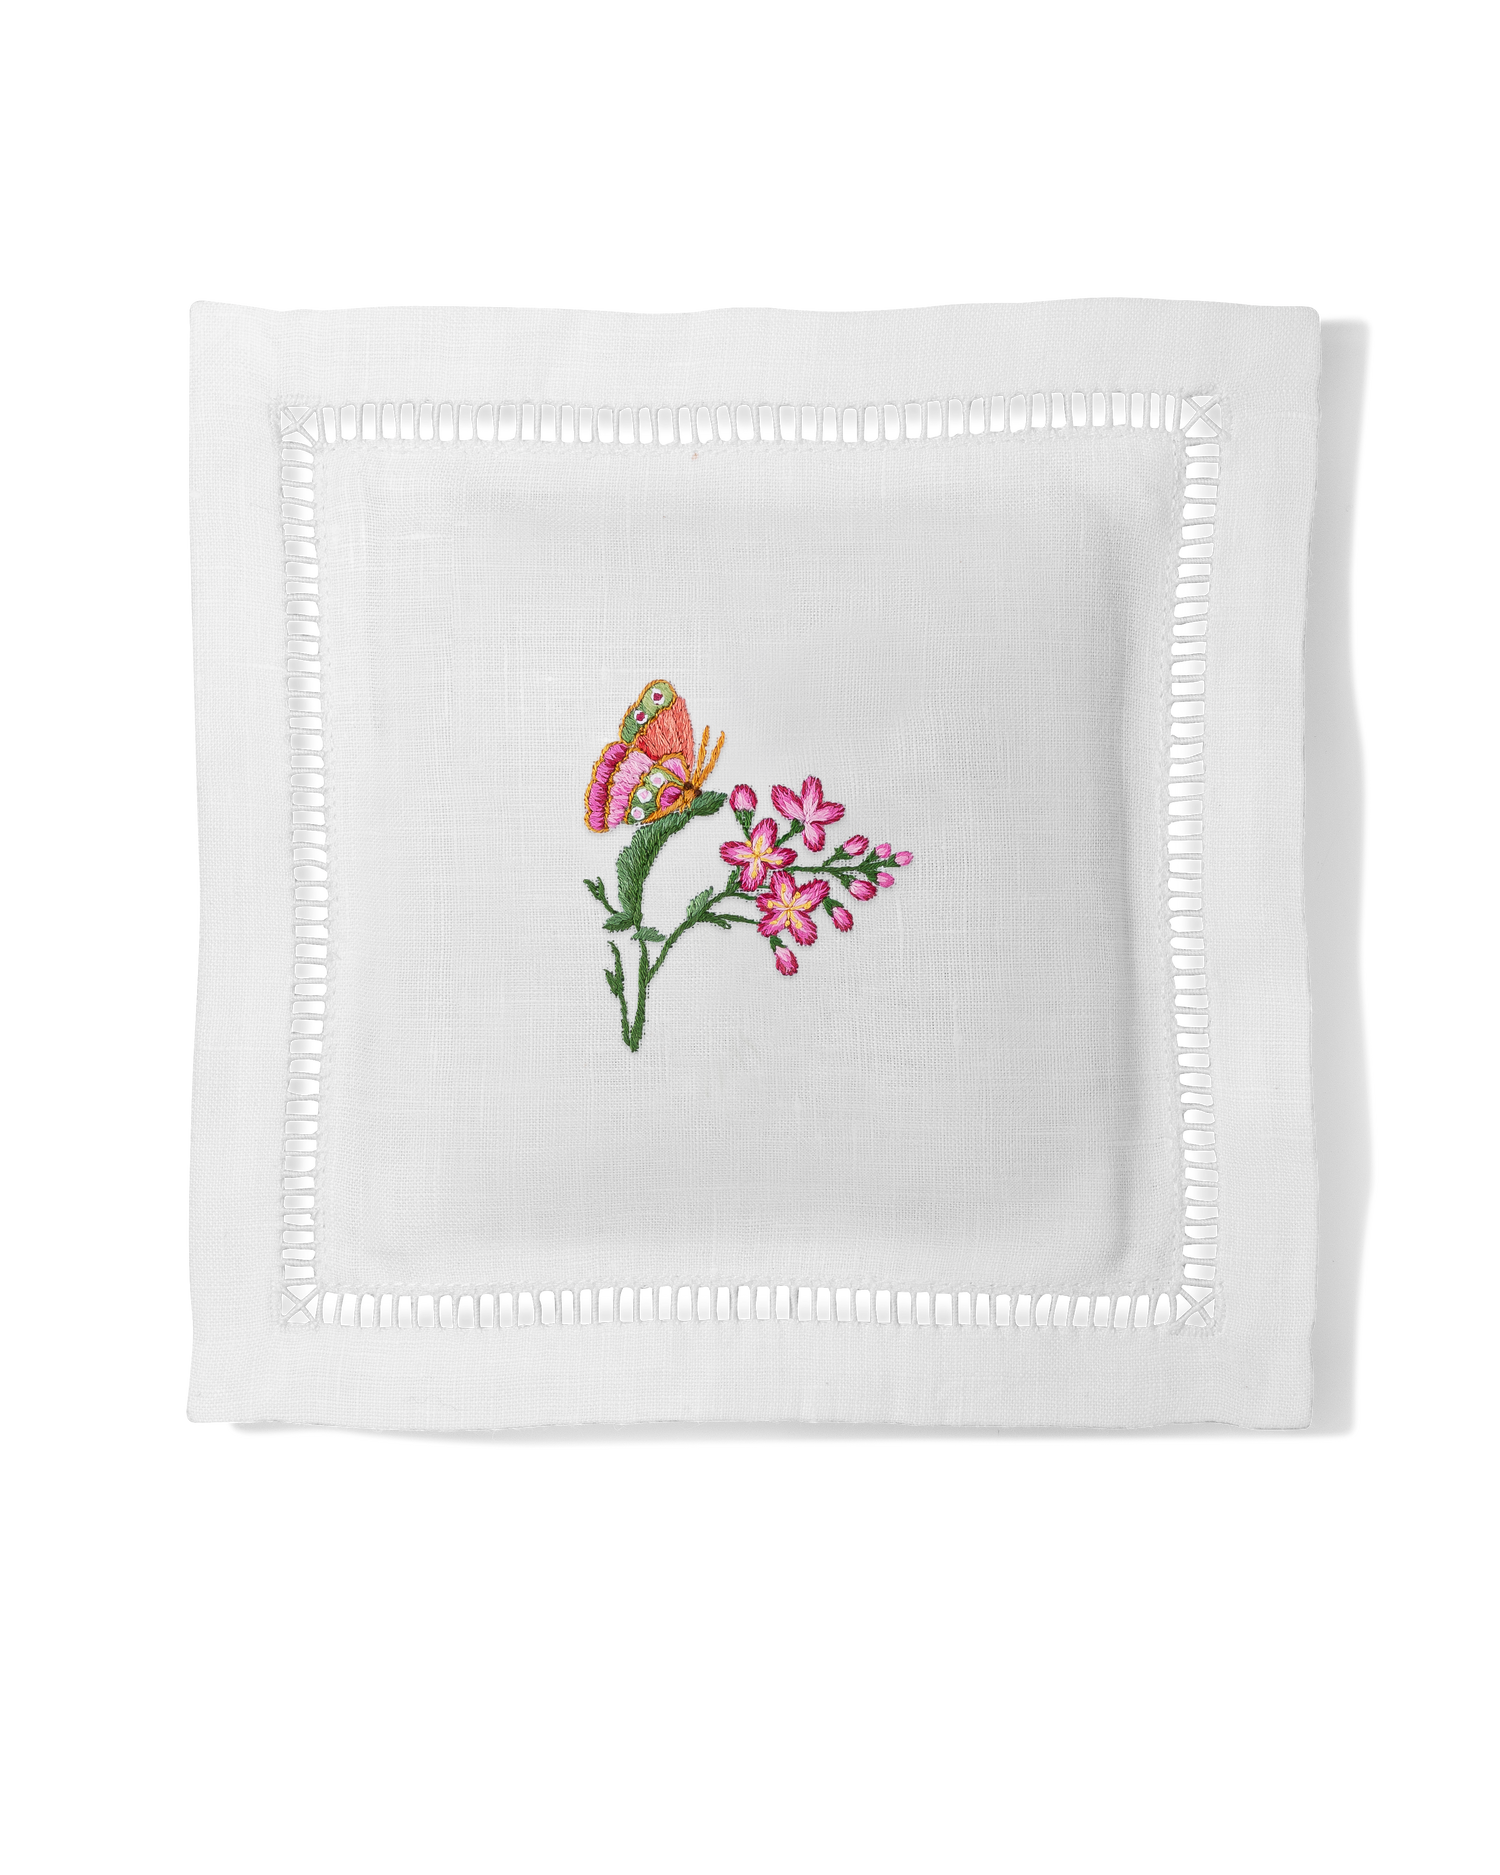 A white sachet with a hemstitch border. 1 butterfly on a pink flower with green leaves is embroidered in the center.